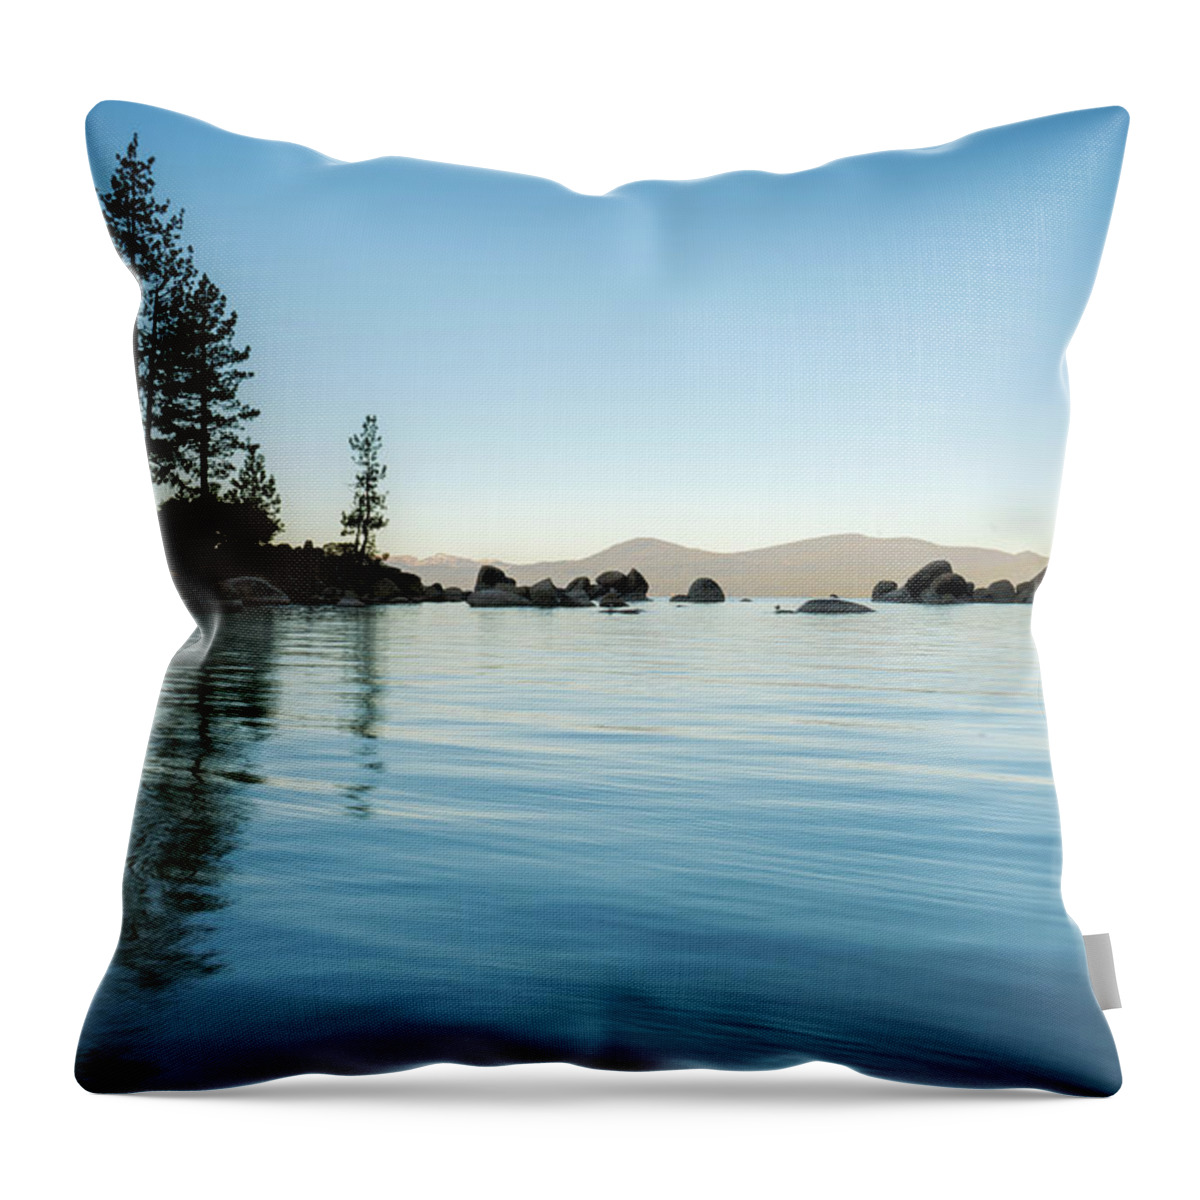 Lake Tahoe Throw Pillow featuring the photograph Tahoe No. 1 by Ryan Weddle